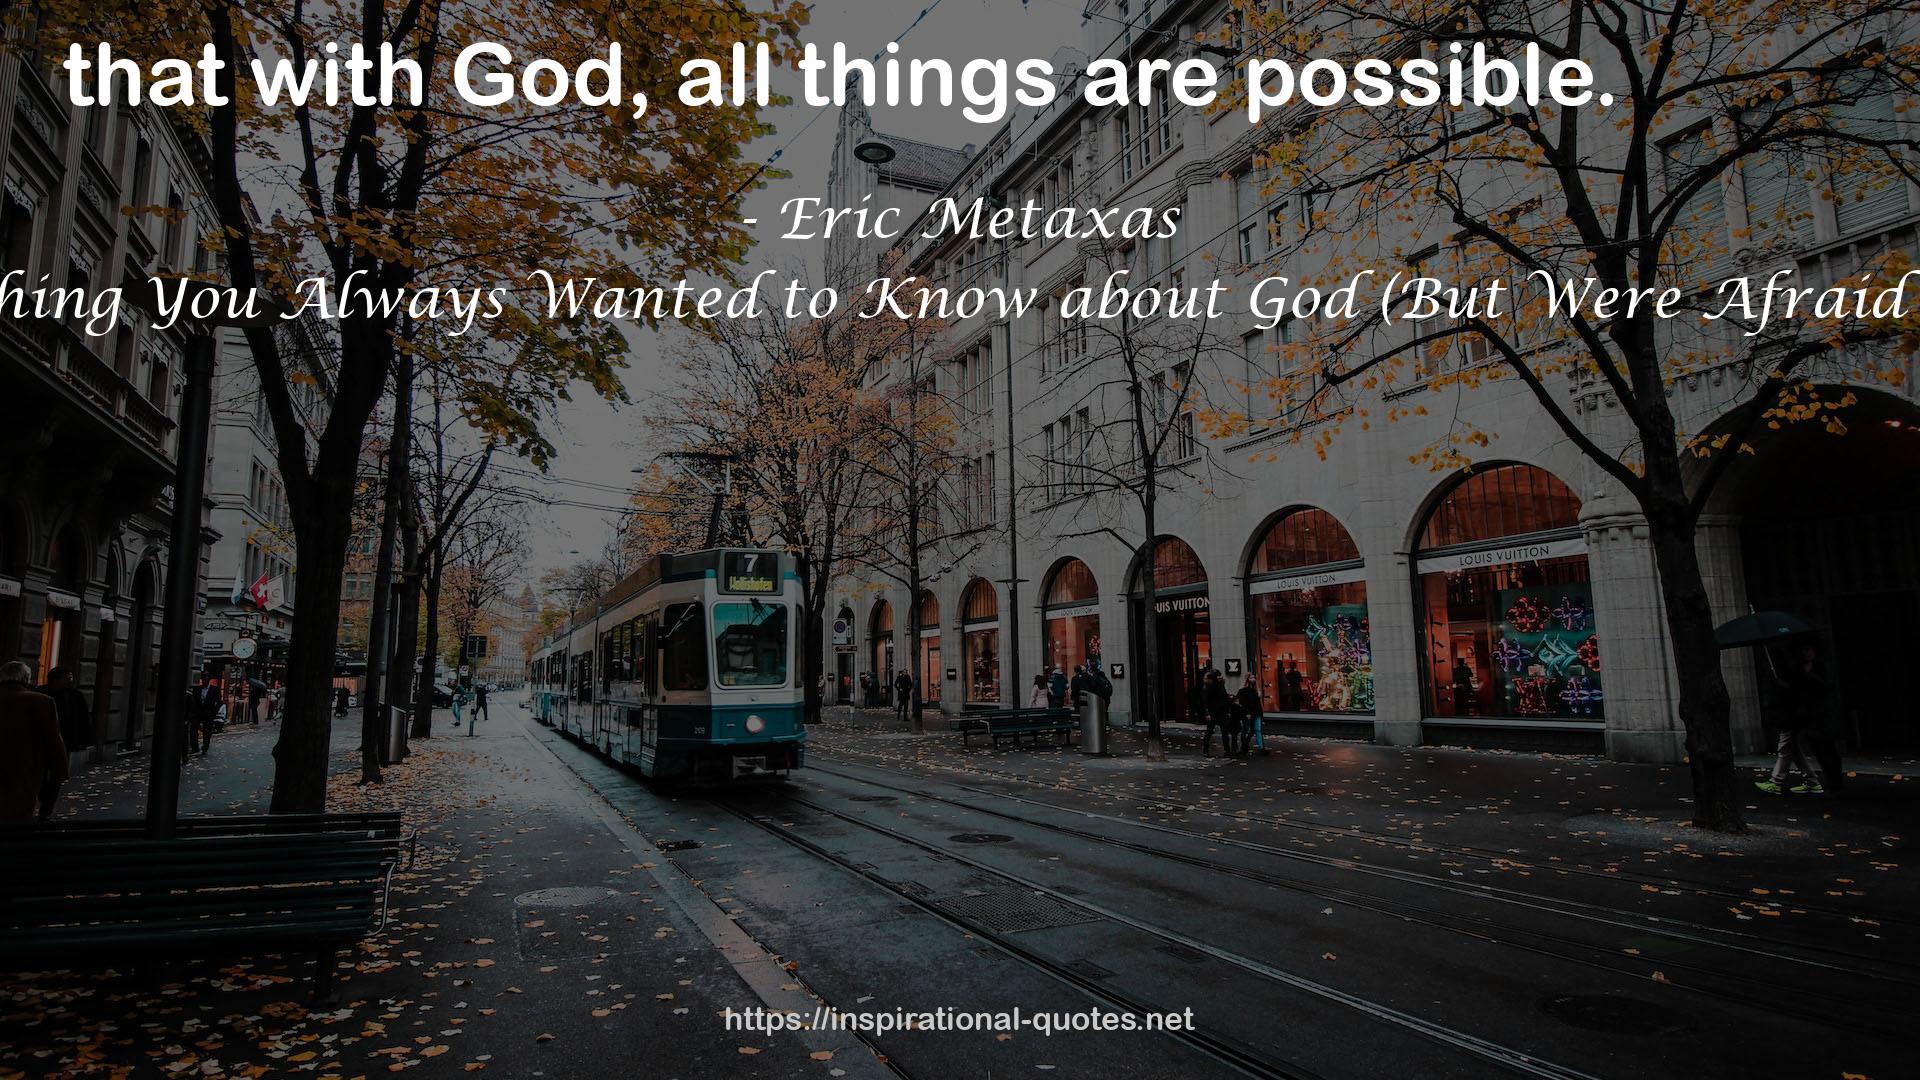 Everything You Always Wanted to Know about God (But Were Afraid to Ask) QUOTES